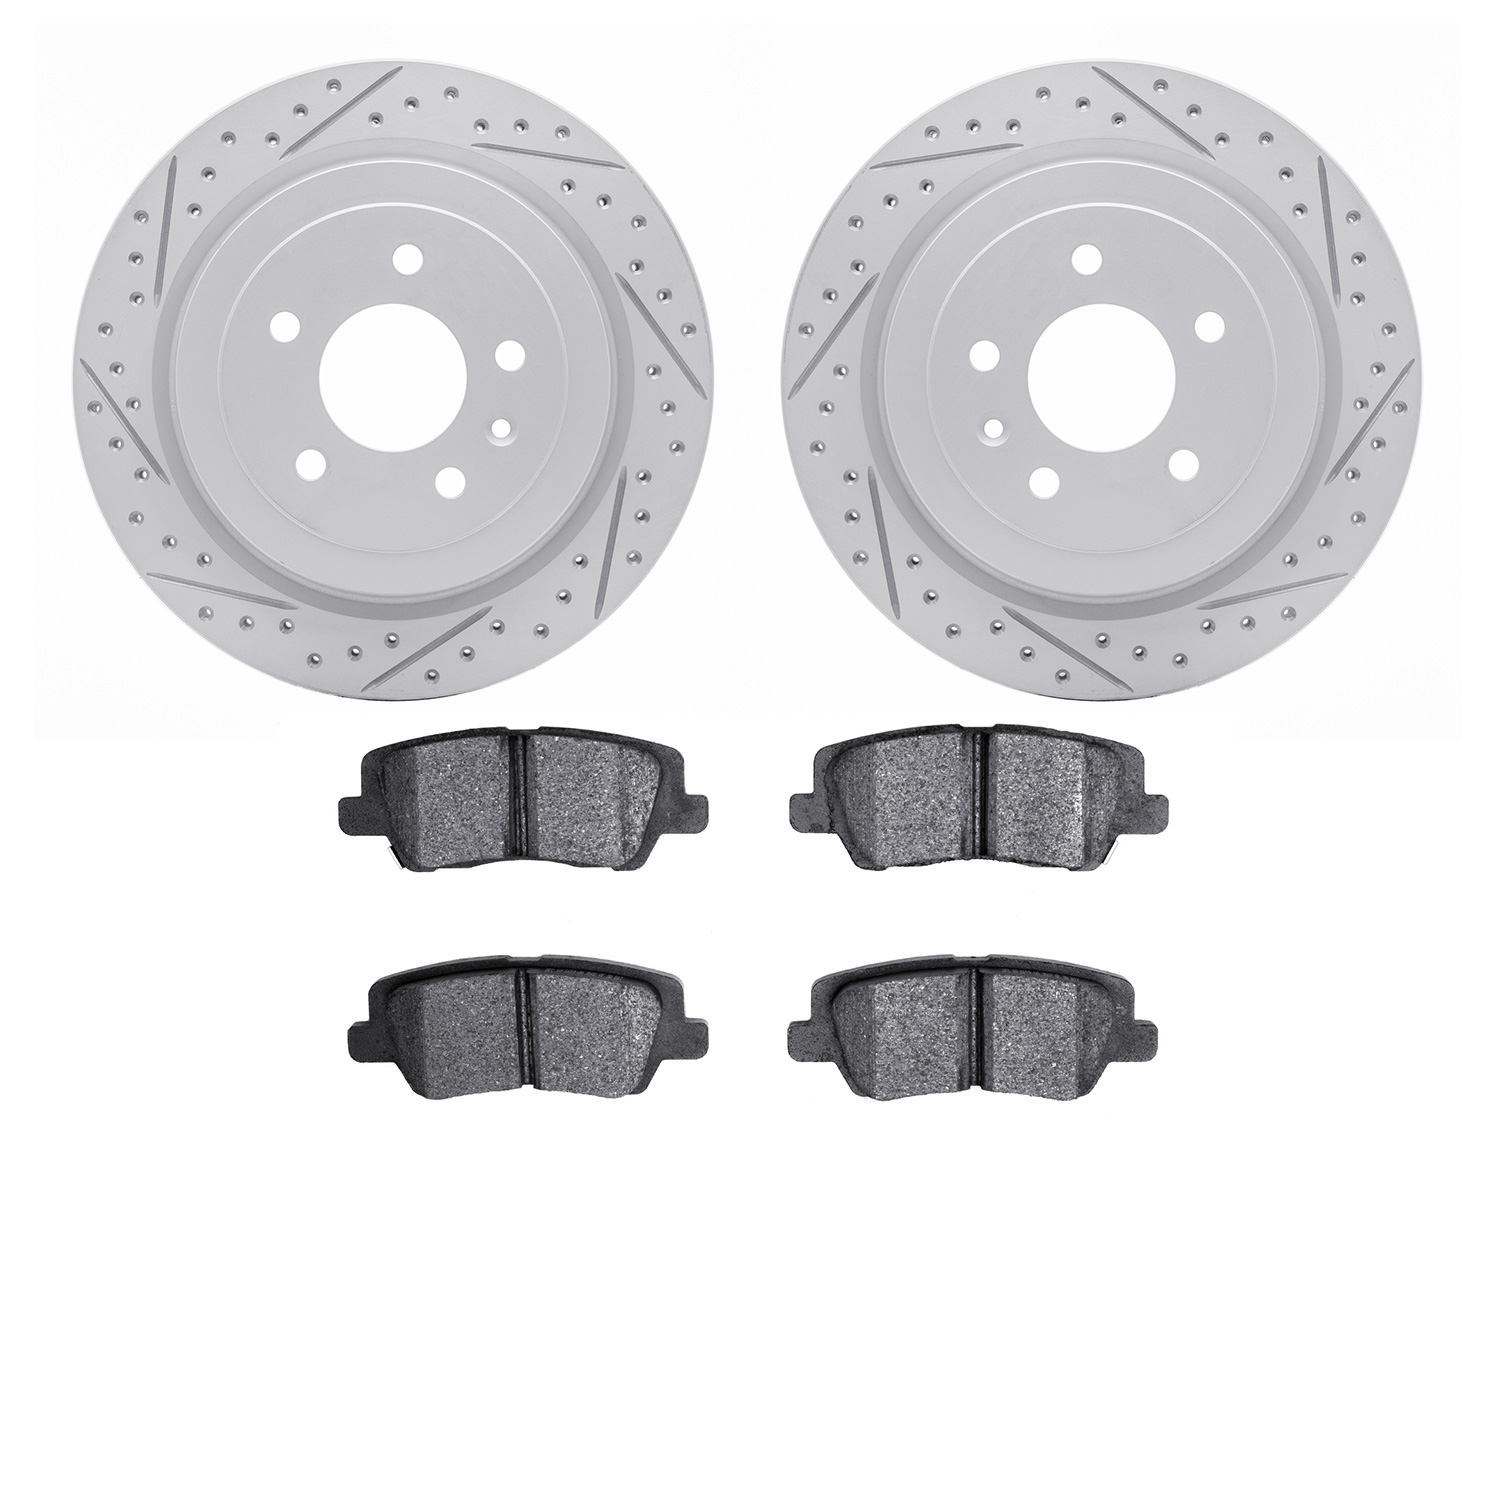 2502-46035 Geoperformance Drilled/Slotted Rotors w/5000 Advanced Brake Pads Kit, 2013-2015 GM, Position: Rear